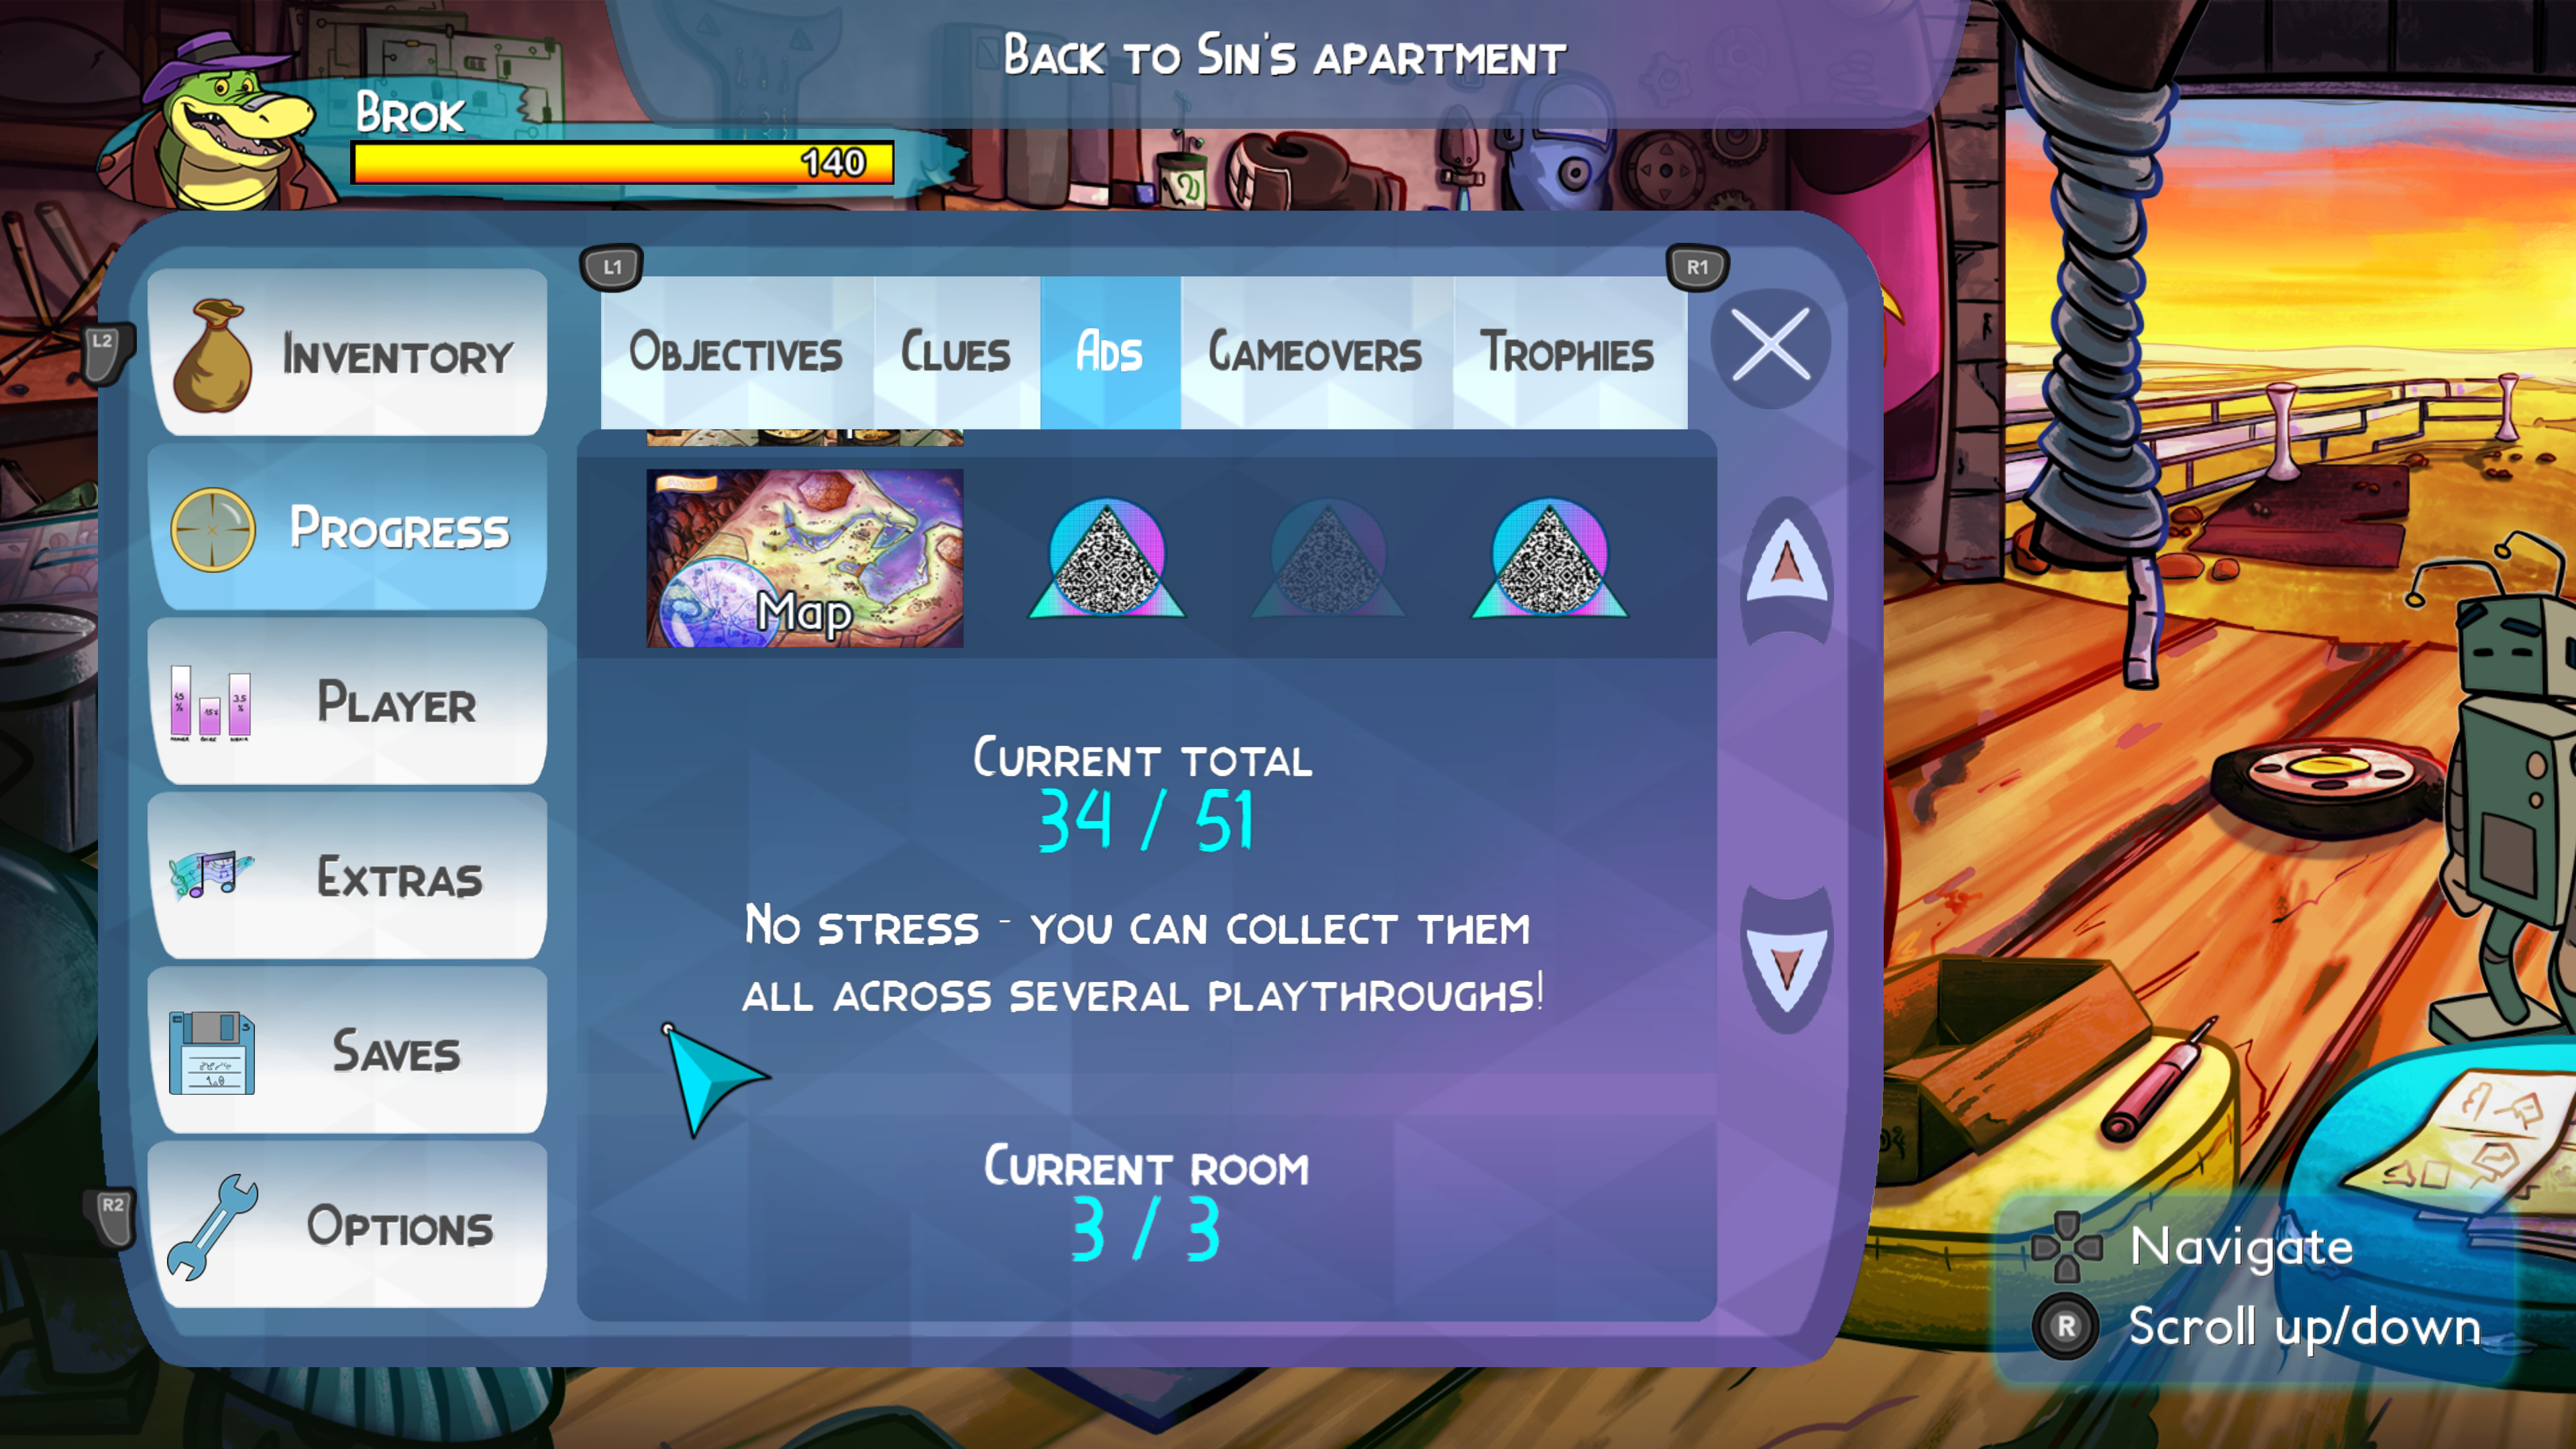 in-game menu screen with categories down the left side reading "Inventory, Progress, Player, Extras, Saves, Options". The current selected category is progress and the sub categories listed across the top are: "Objectives, Clues, Ads, Gameovers, Trophies". Ads is the currently selected sub category displaying a current total of 34/51 ads found. Below this reads "No stress you can collect them all across several playthroughs!" below this at the very bottom reads "Current room 3/3"